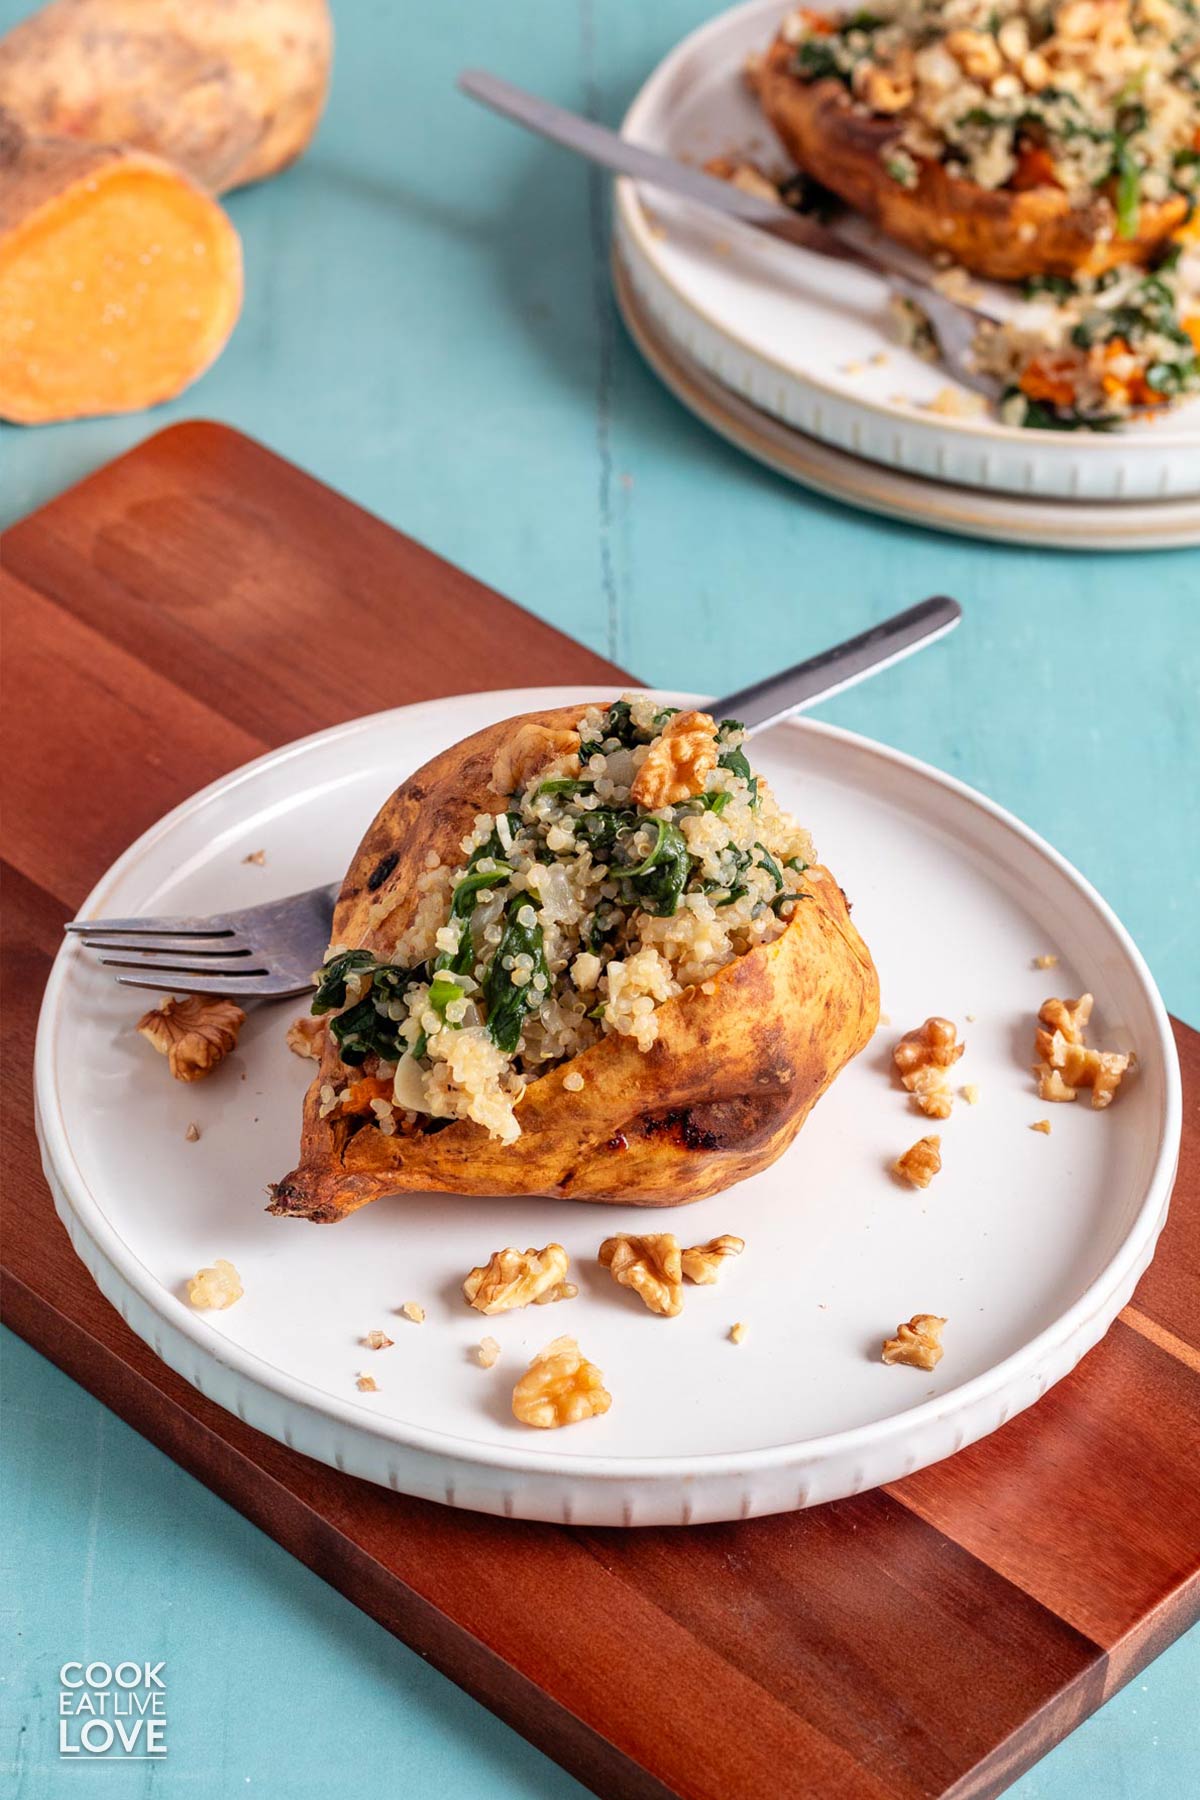 Baked stuffed sweet potato topped spinach, quinoa, and walnuts served on a white plate.